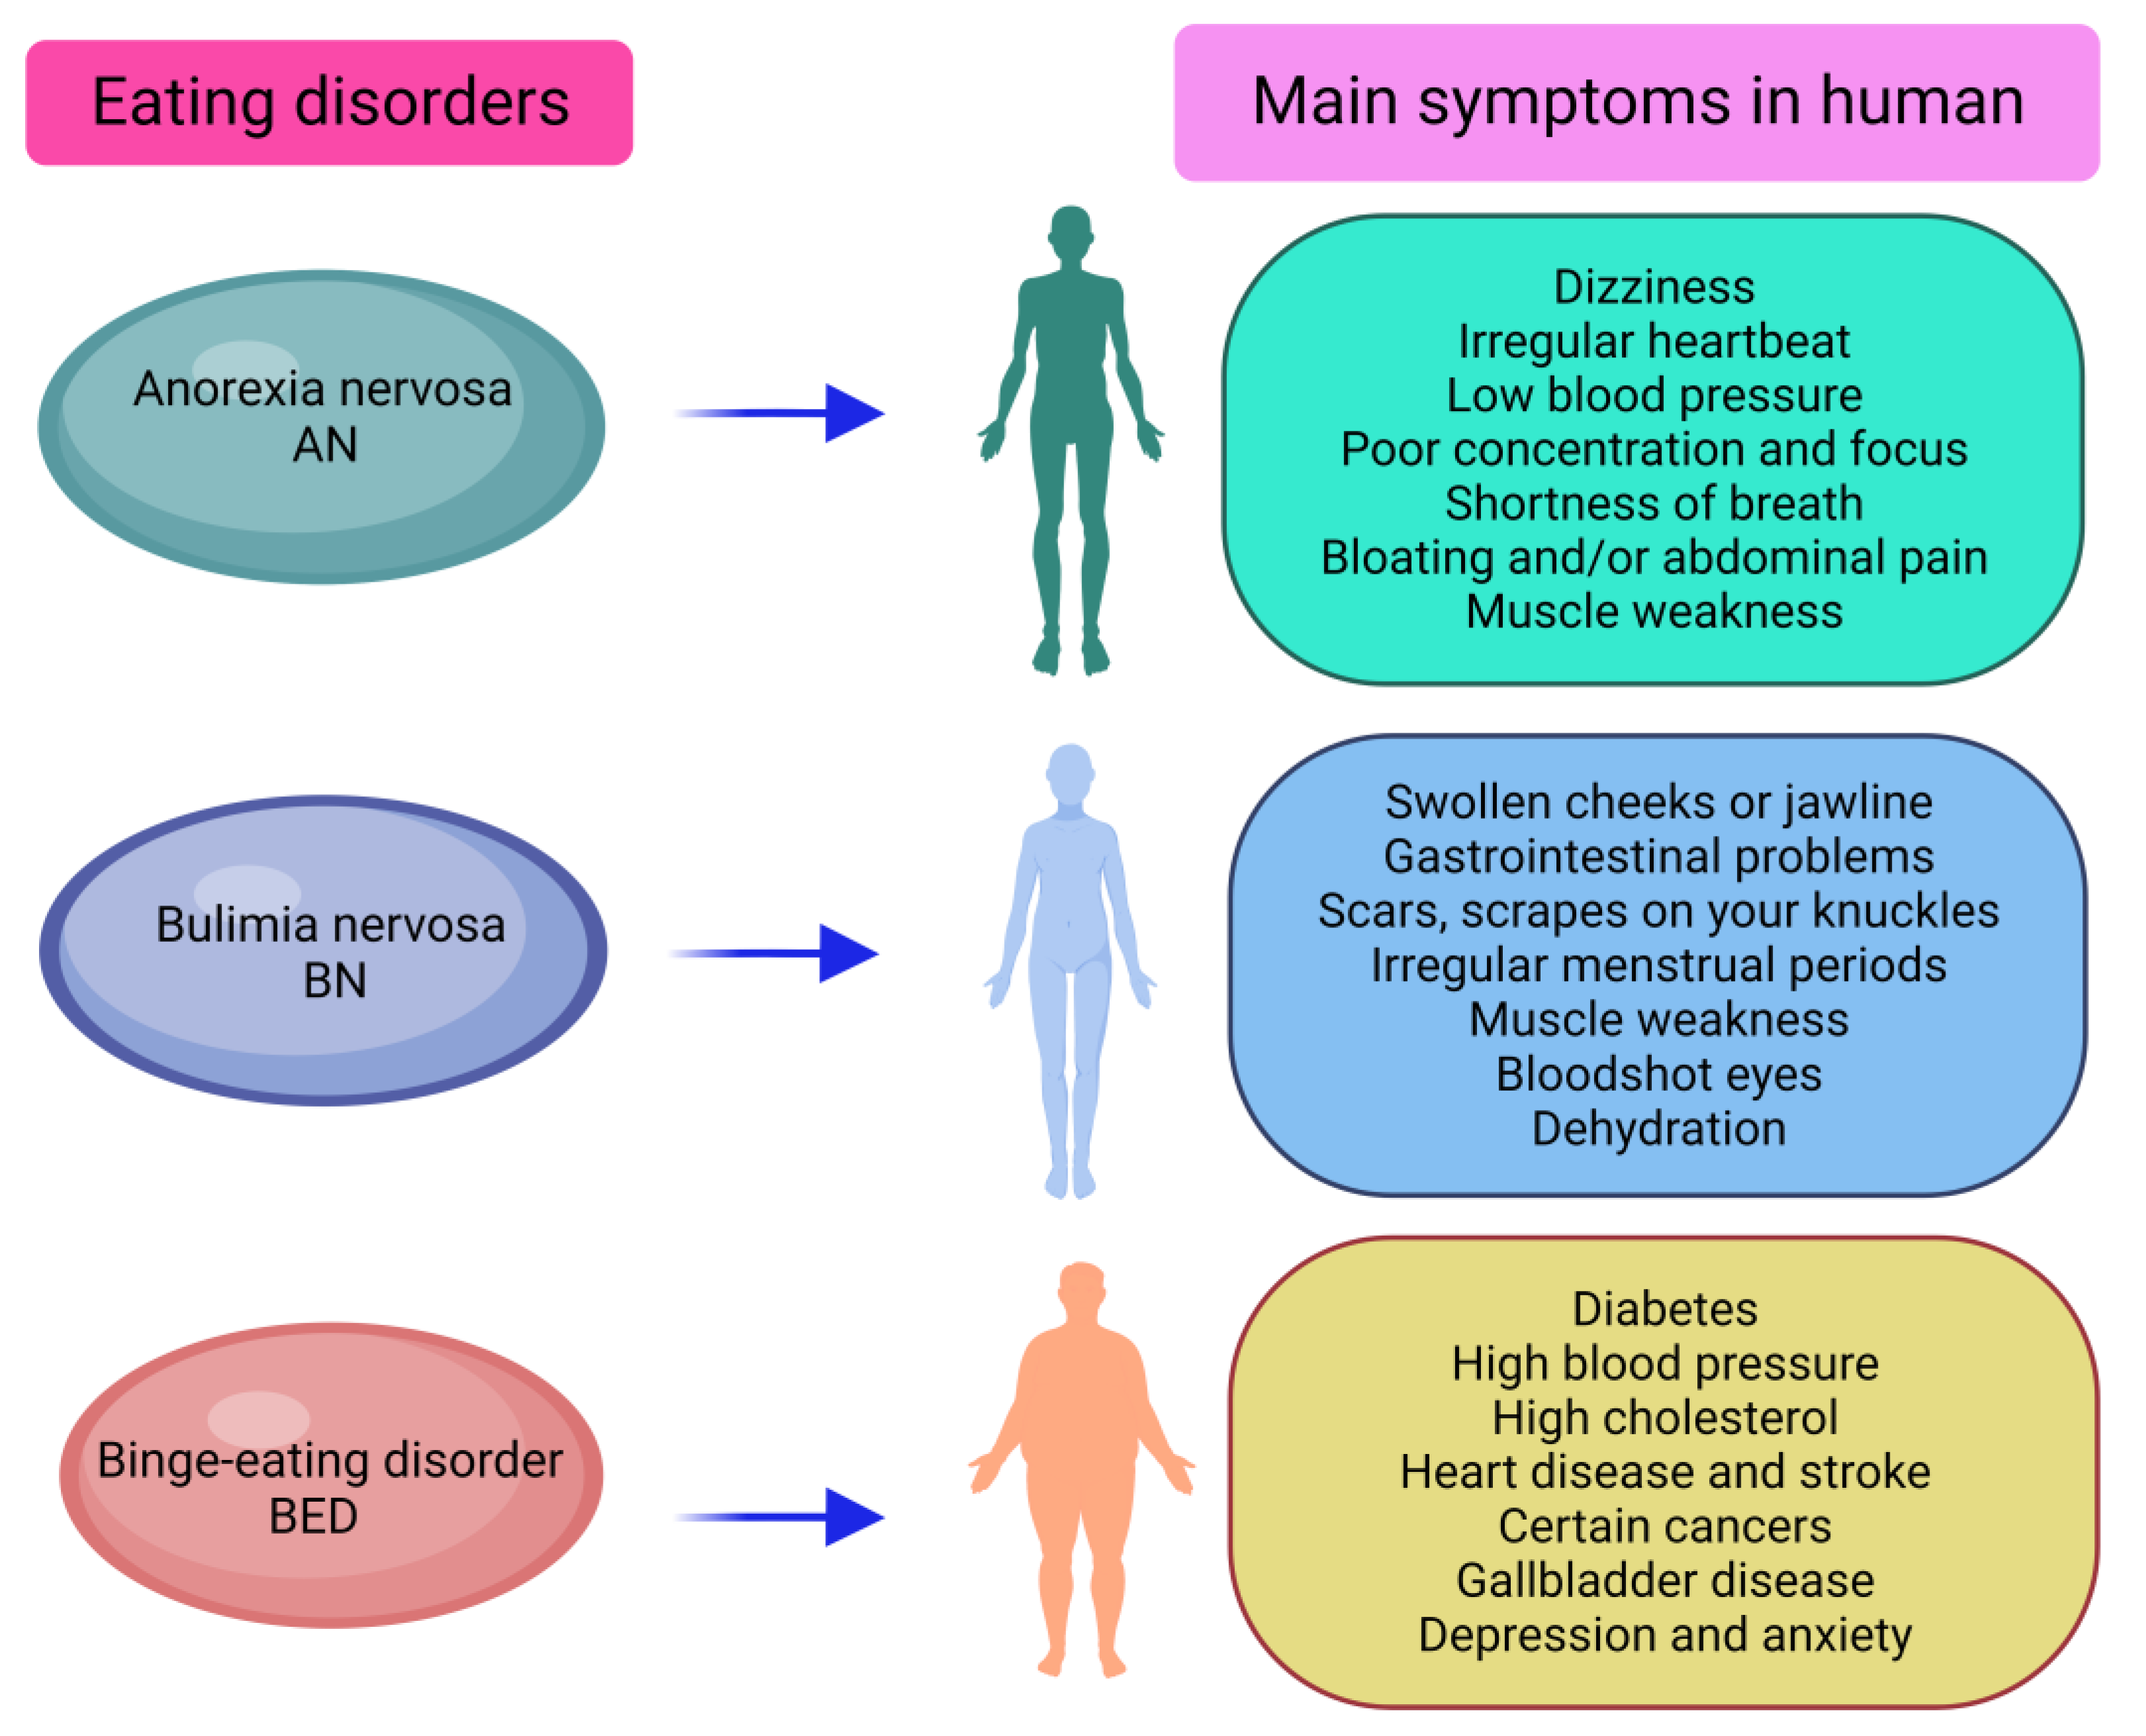 IJERPH | Free Full-Text | Current Discoveries and Future Implications of  Eating Disorders